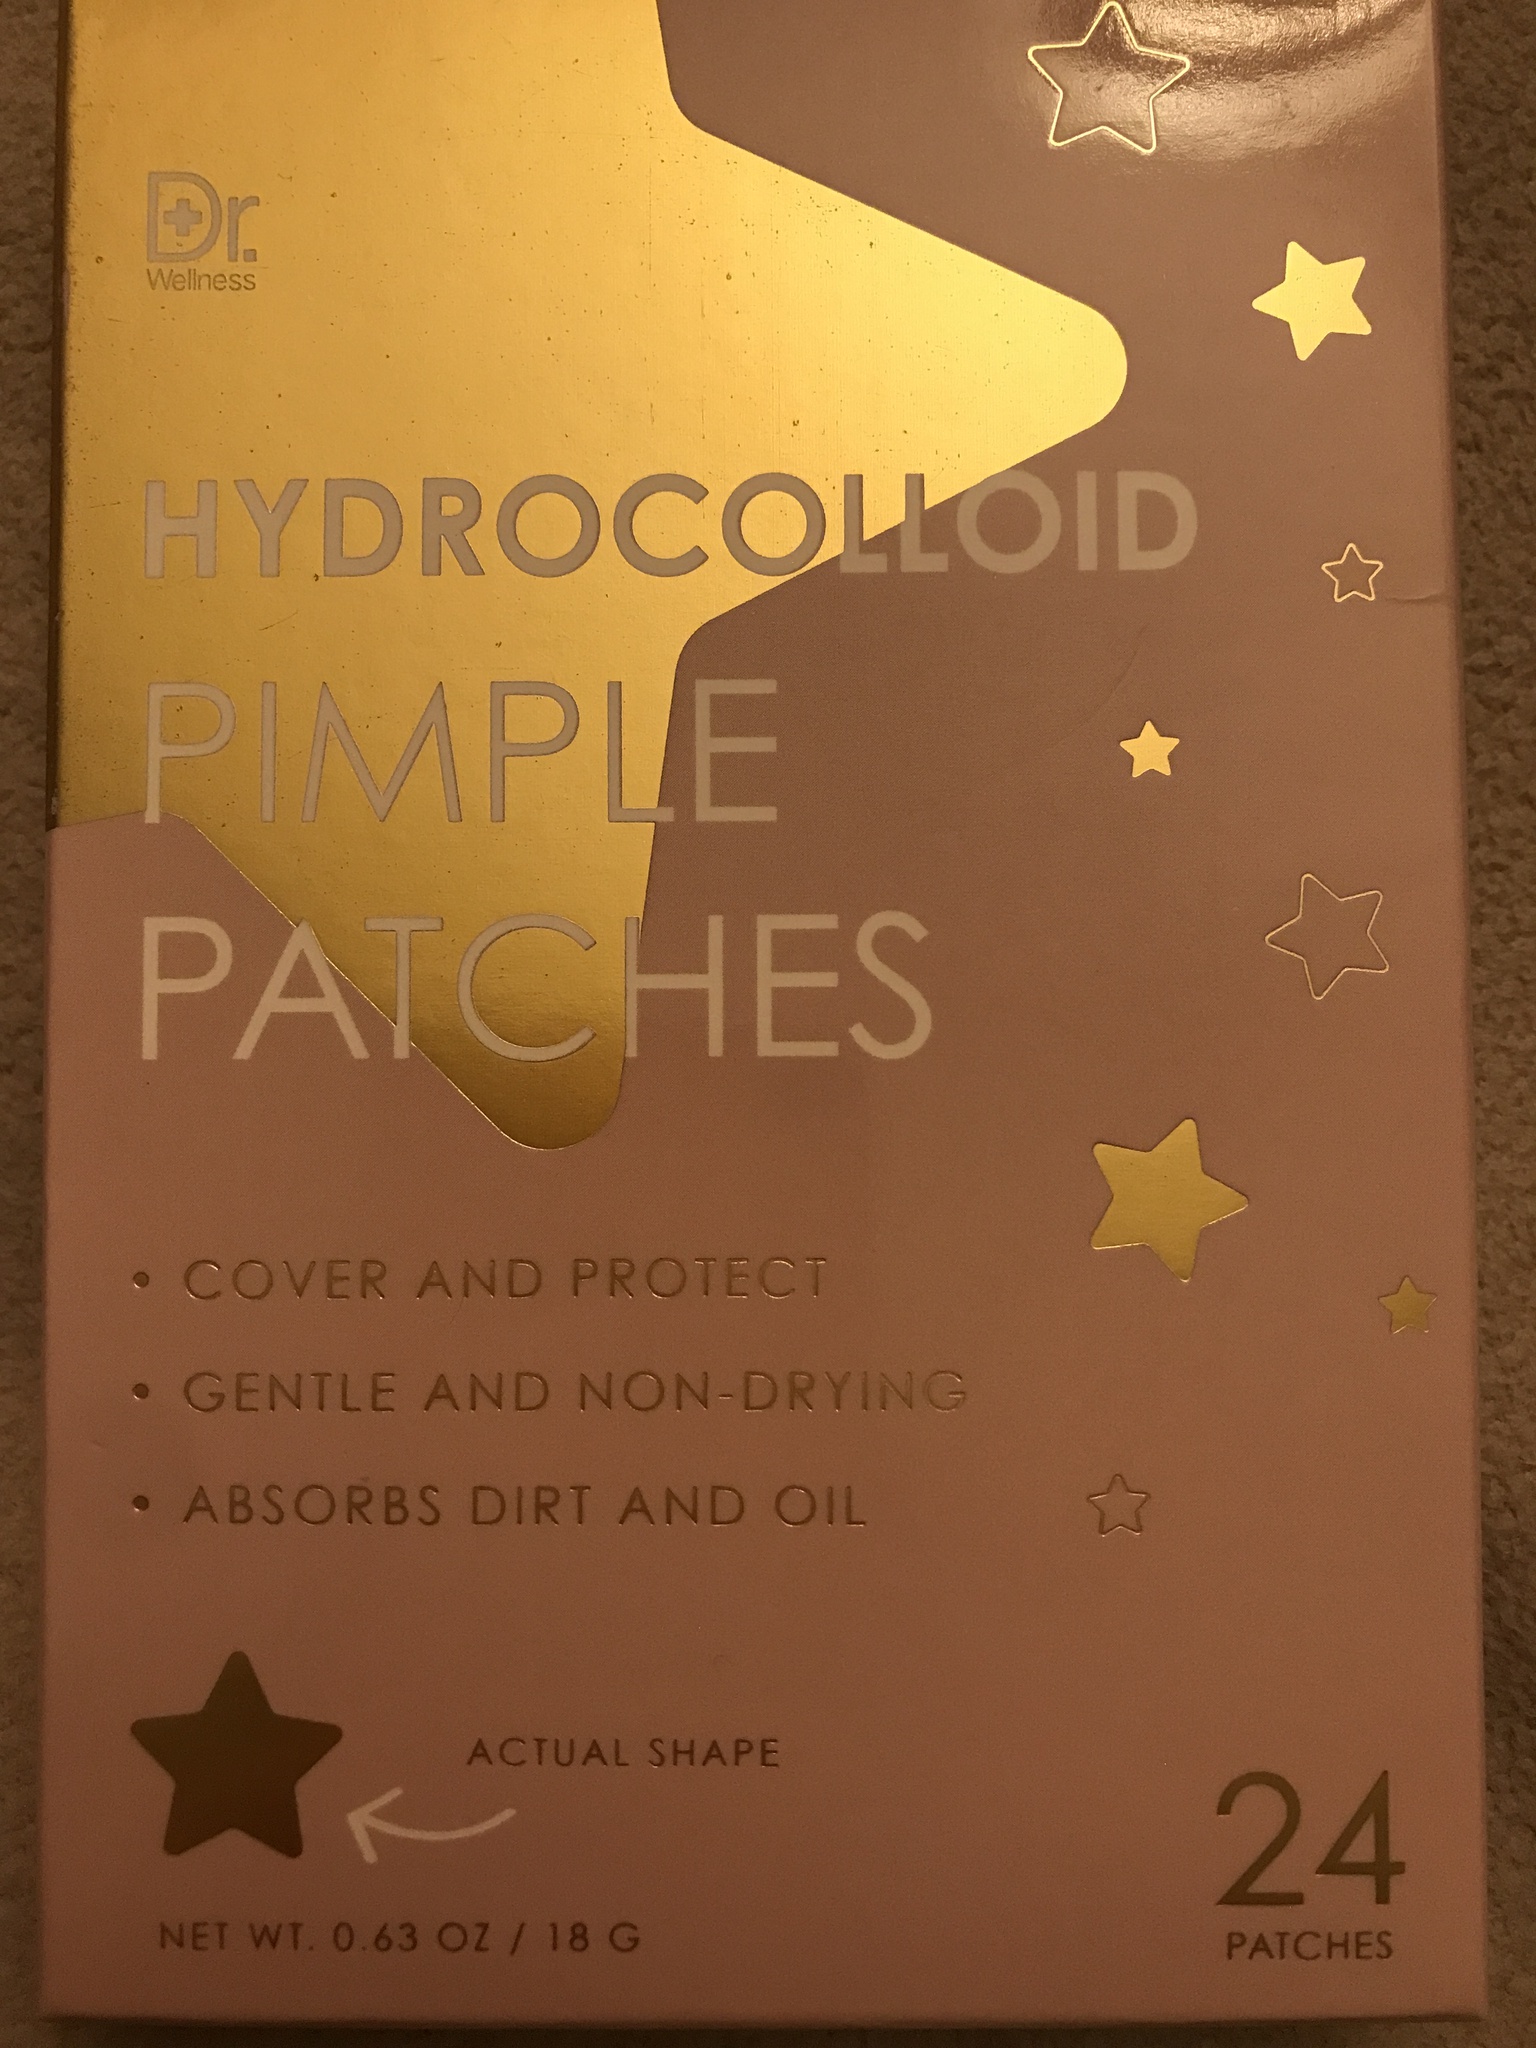 Dr. Wellness Hydrocolloid Pimple Patches